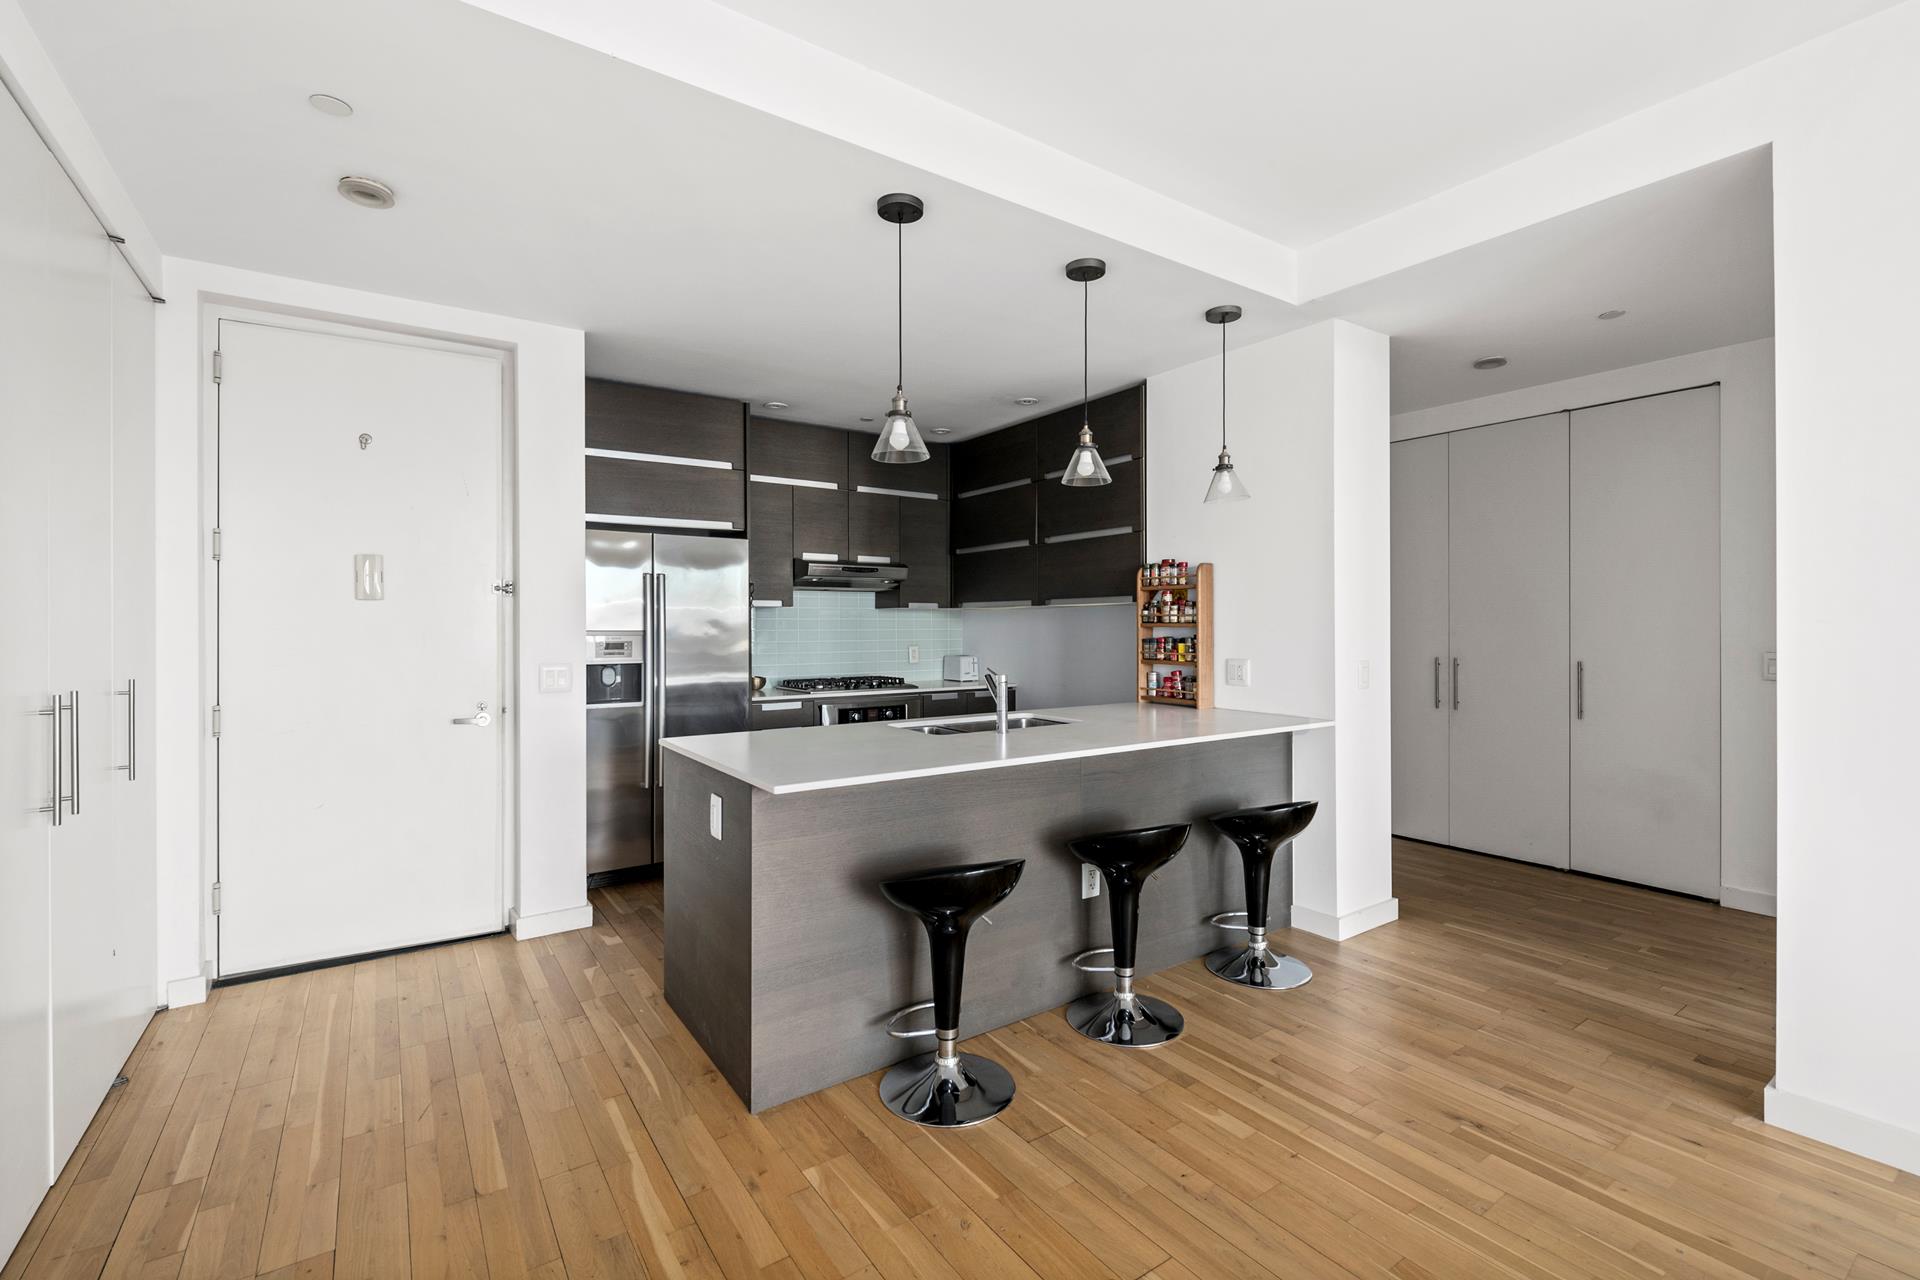 a view with kitchen island stainless steel appliances wooden floor and living room view